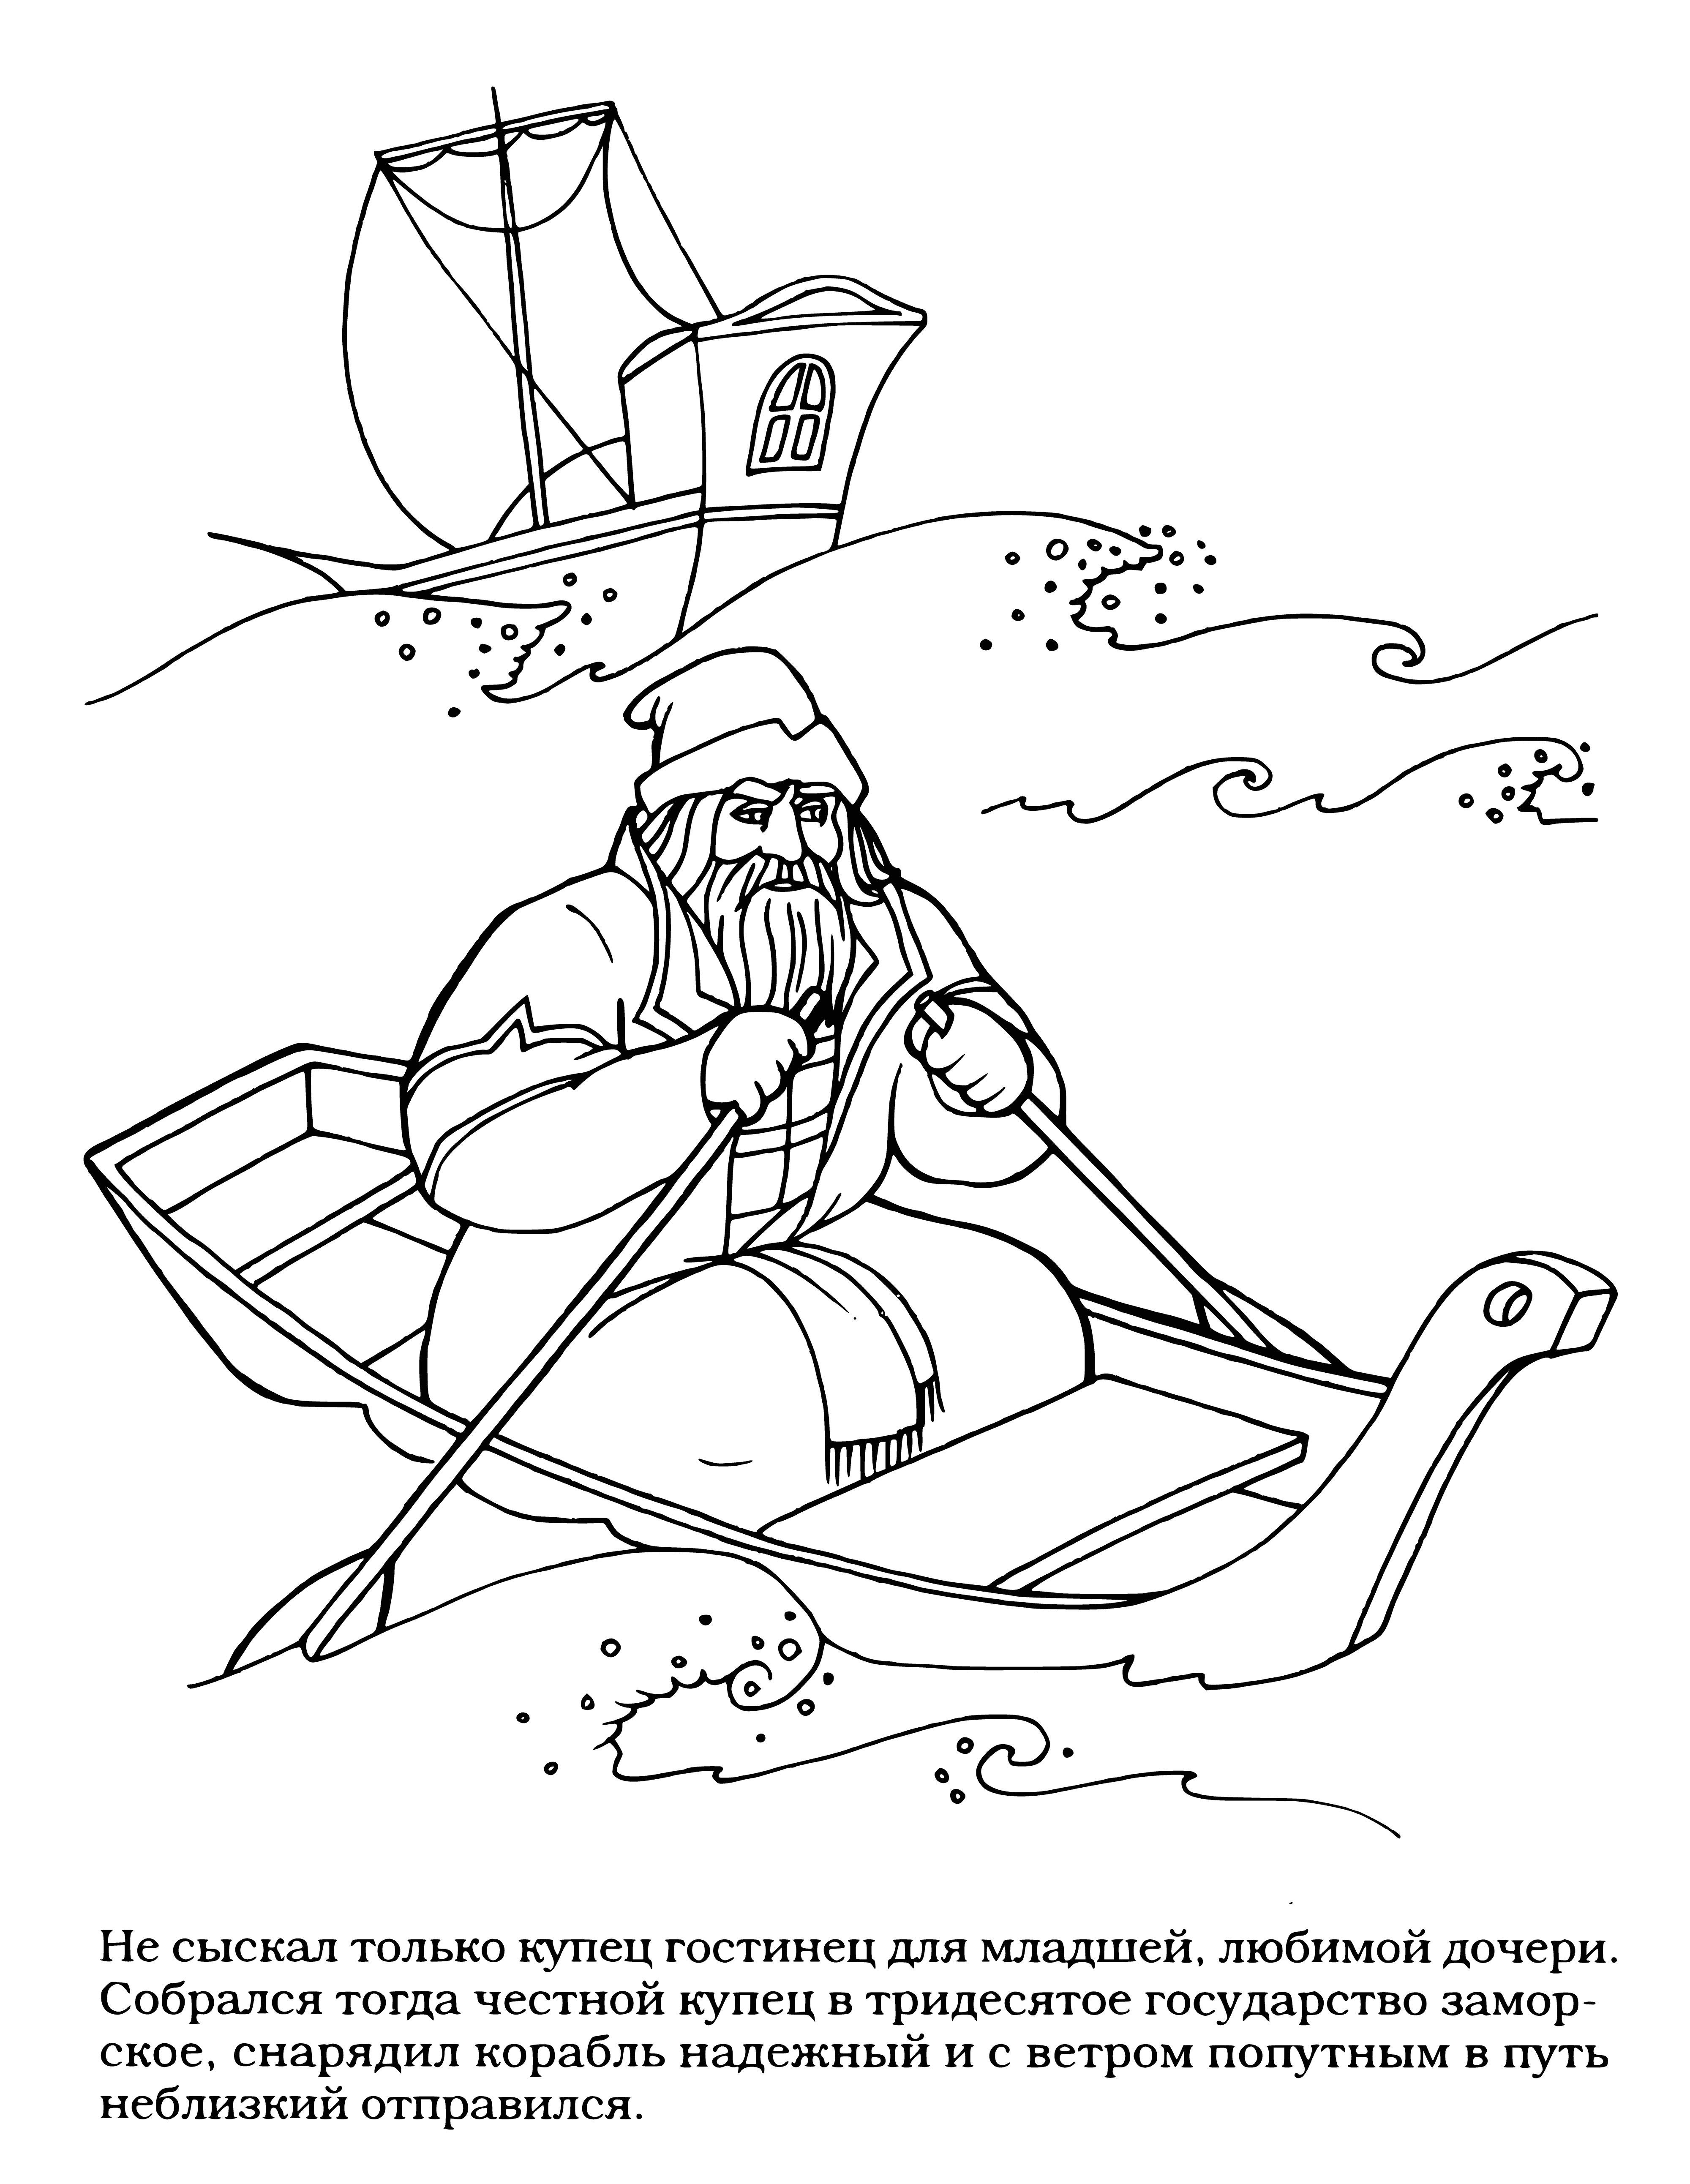 Merchant in a boat coloring page